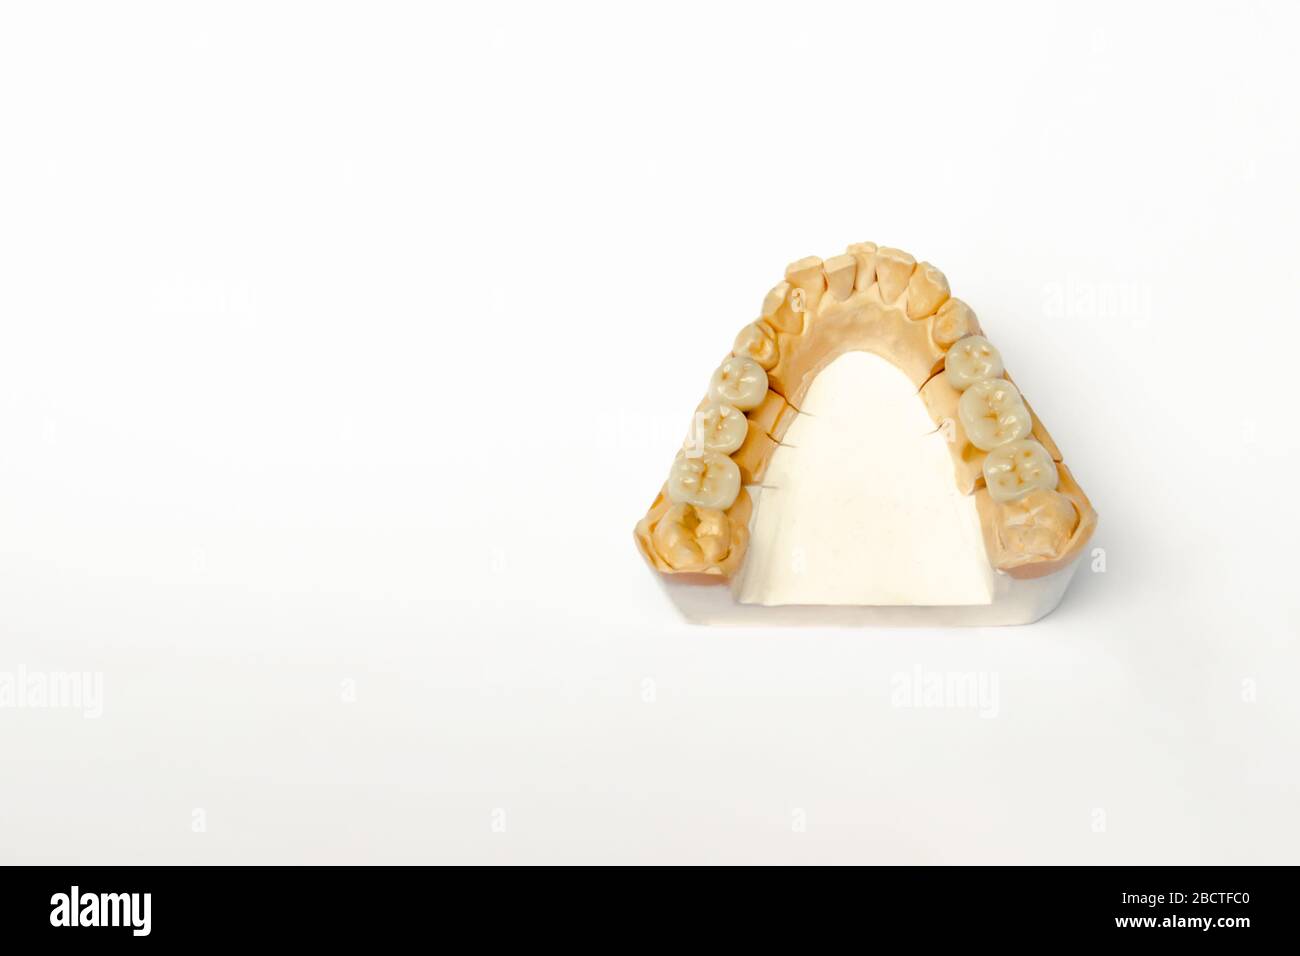 gypsum model of the teeth of the lower jaw with ceramic teeth. false teeth molars and premolars. White background Stock Photo